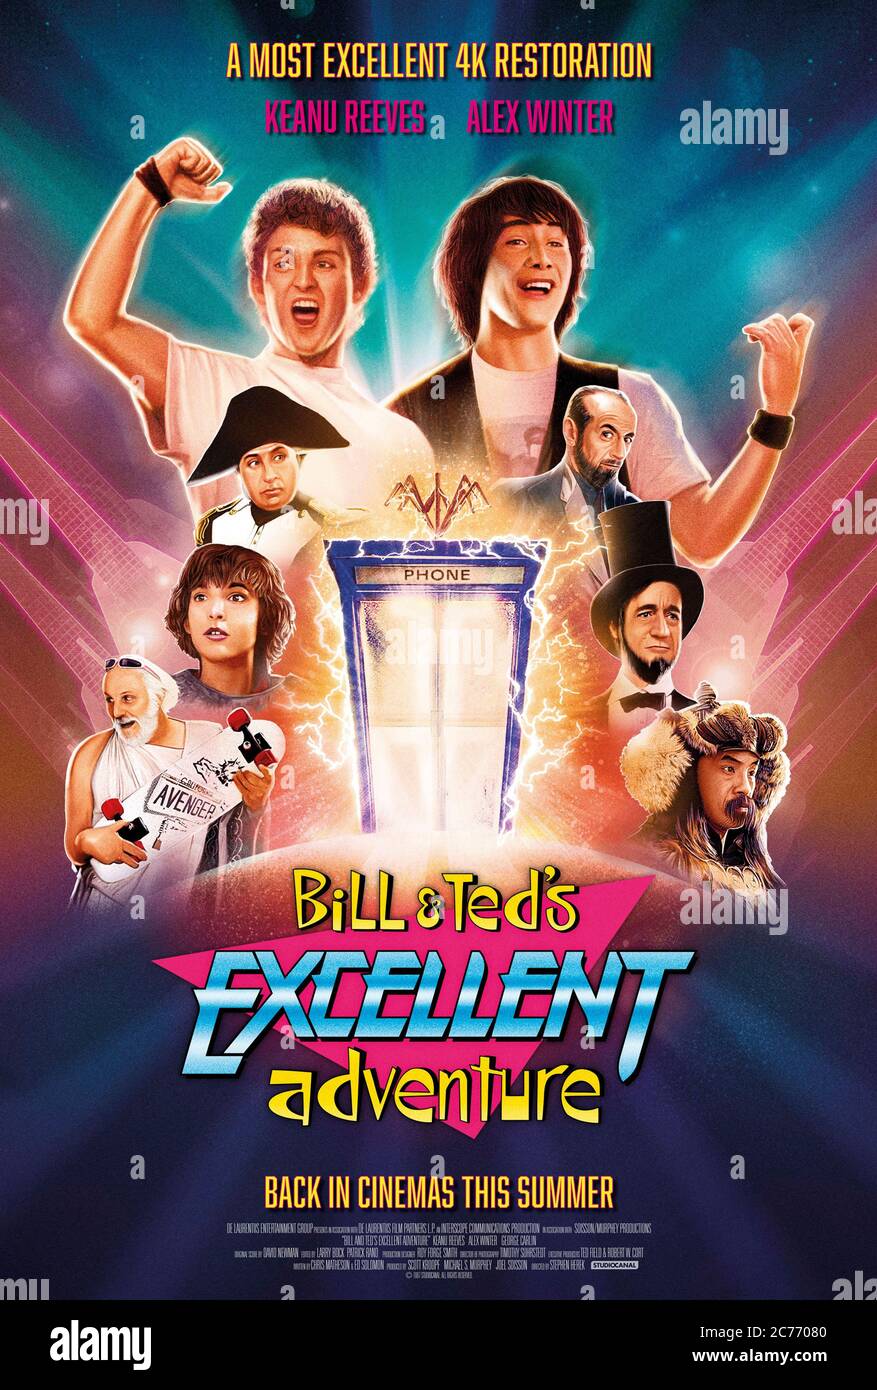 Bill & Ted's Excellent Adventure (1989) directed by Stephen Herek and starring Keanu Reeves, Alex Winter, George Carlin and Terry Camilleri. 4K theatrical re-release for the cult 1989 film about two underachieving teenagers who set off in a time machine and meet historical figures. Stock Photo